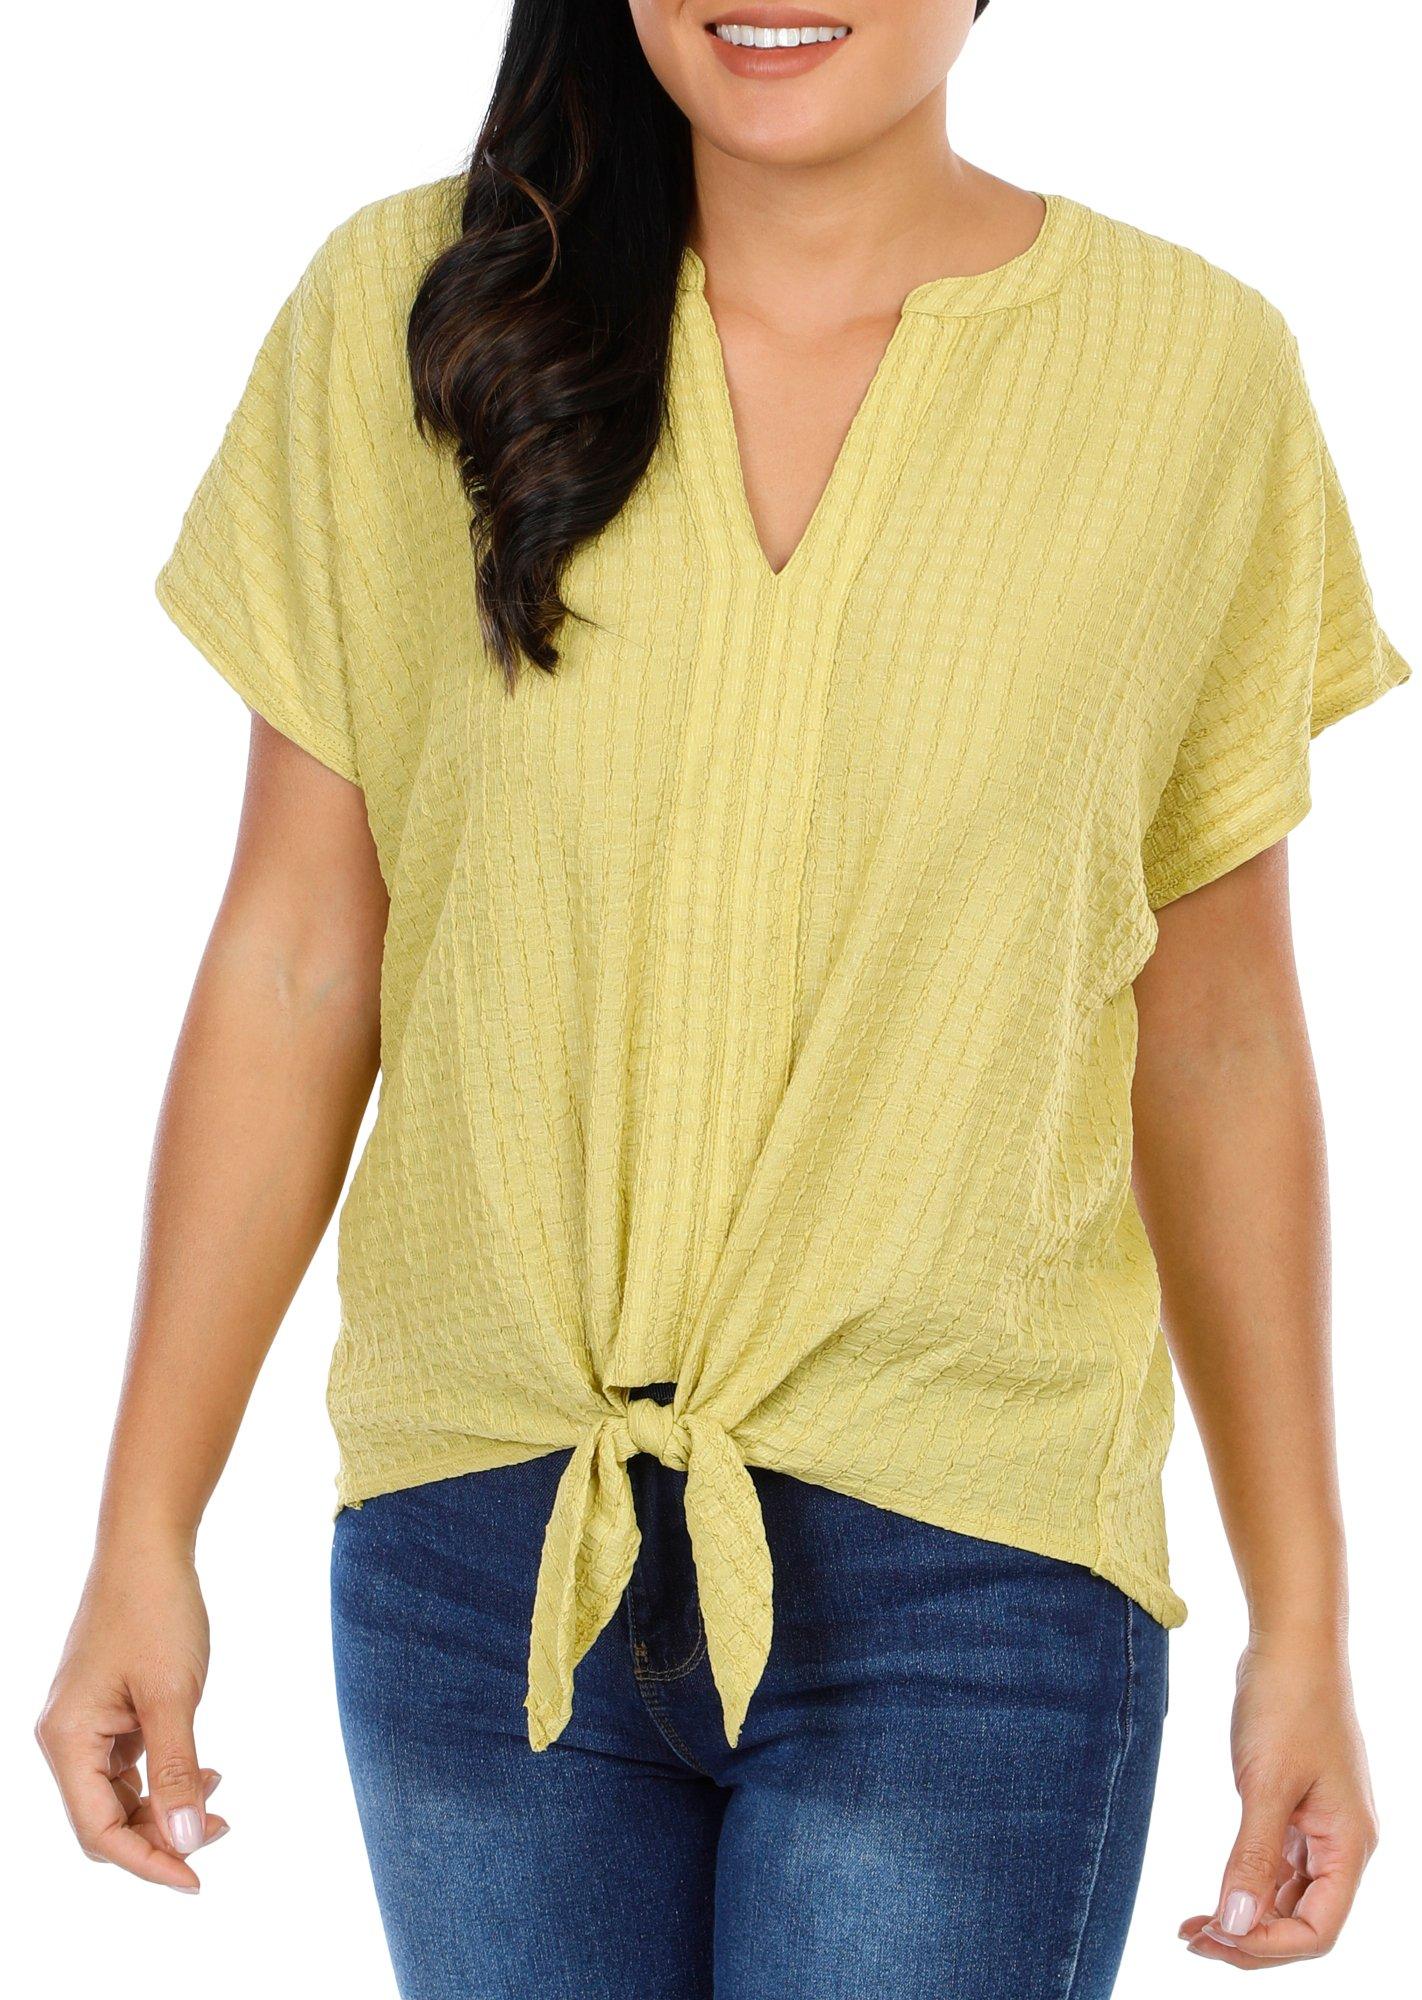 Women's Solid Textured Knit Top